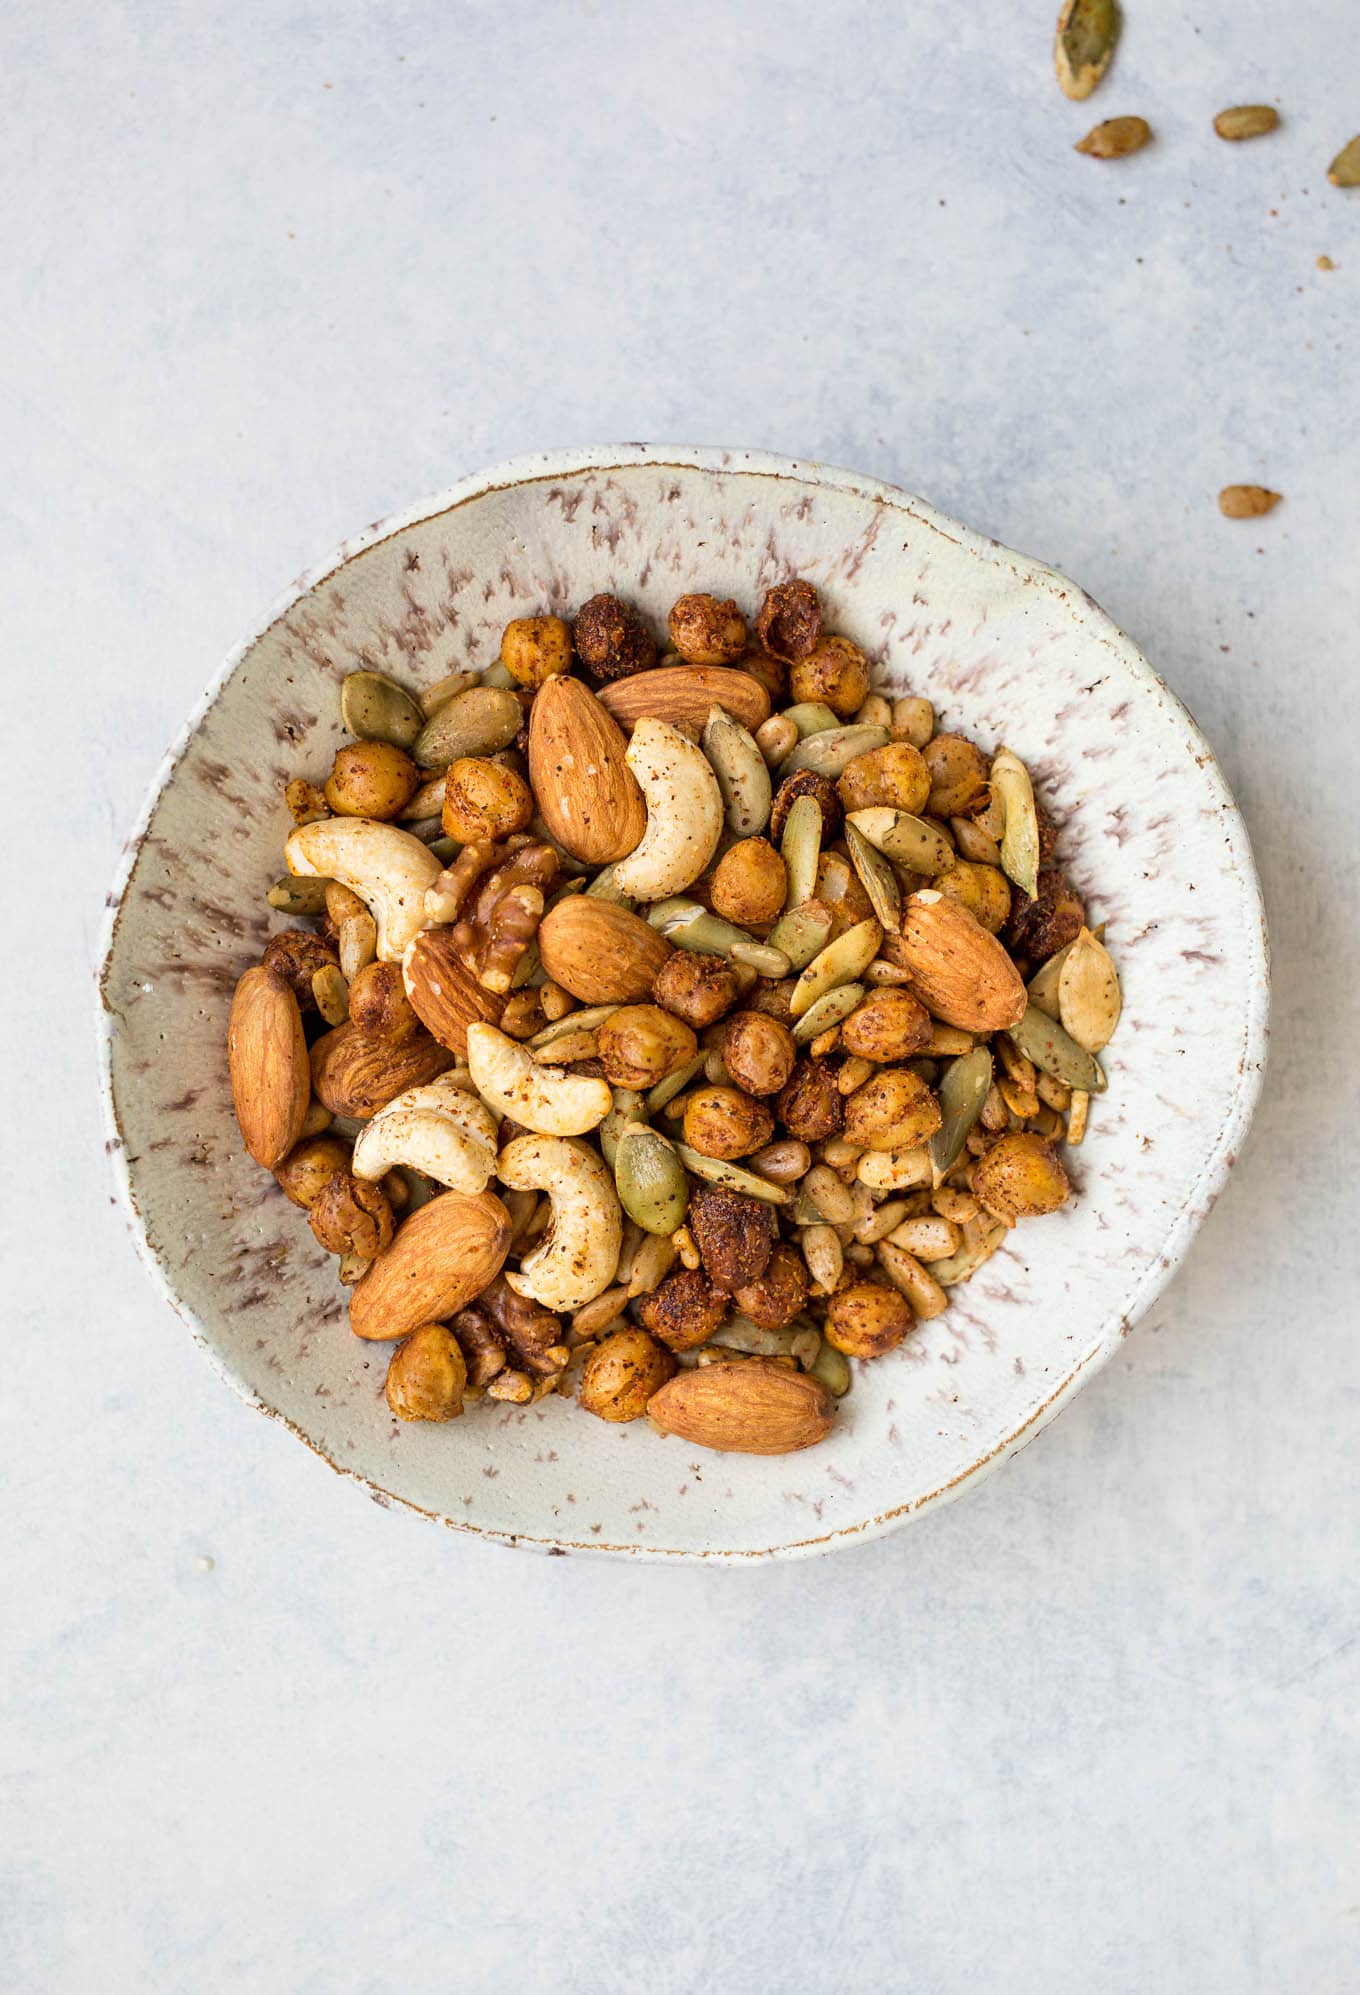 This Spicy Roasted Chickpea Snack Mix is loaded with roasted chickpeas, almonds, cashews, walnuts, pepitas, and sunflower seeds coated with a homemade spicy seasoning mix. Gluten-free, vegan.